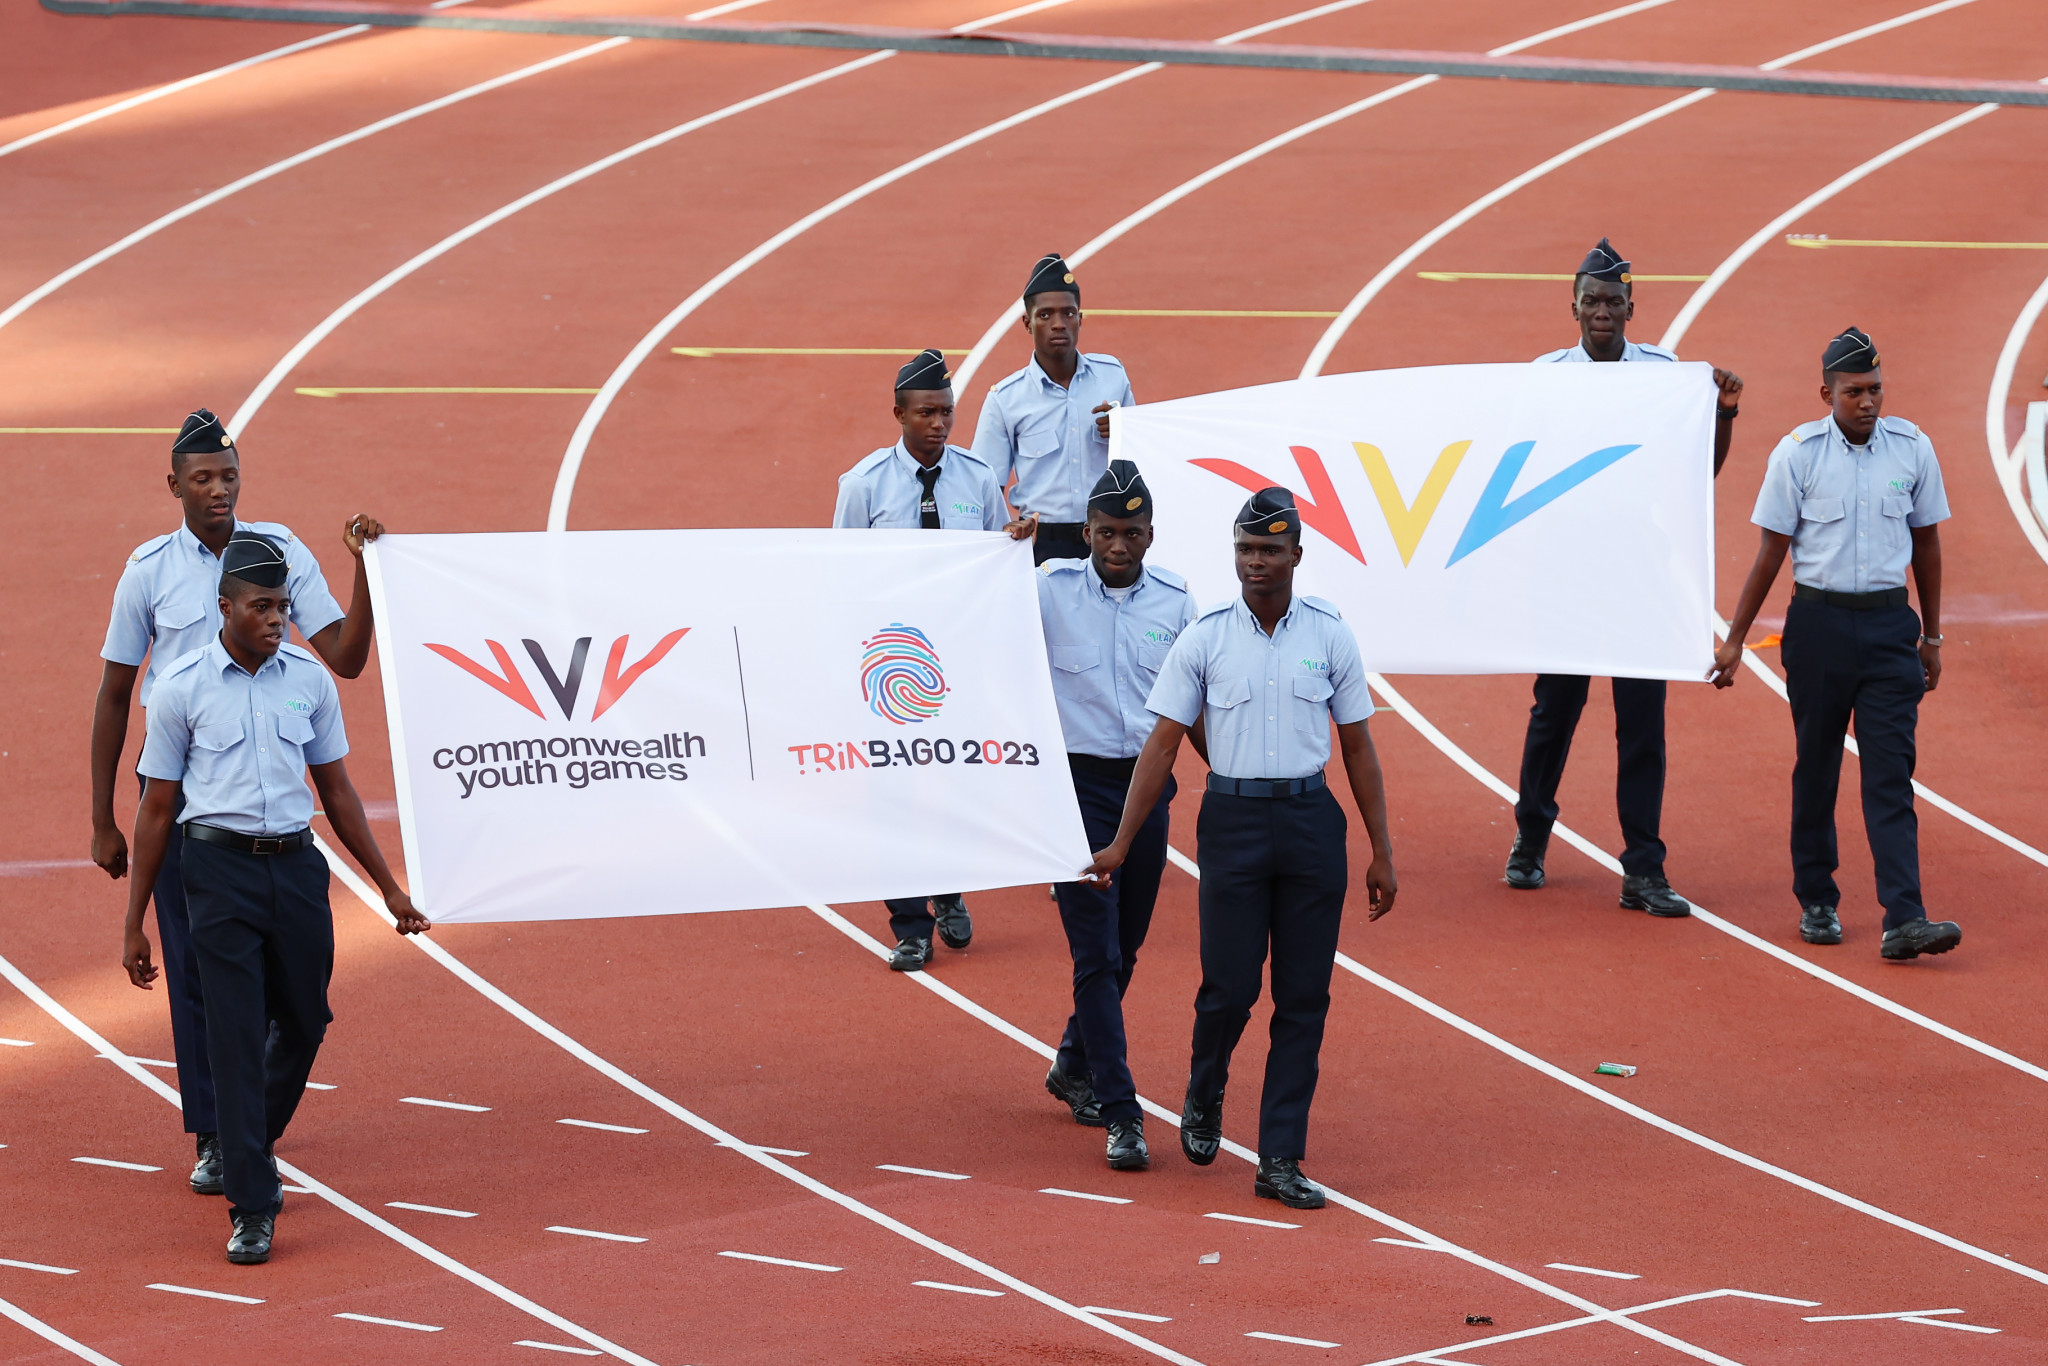 Flags for Trinbago 2023 and the Commonwealth Games Federation were paraded during the Opening Ceremony  ©Getty Images